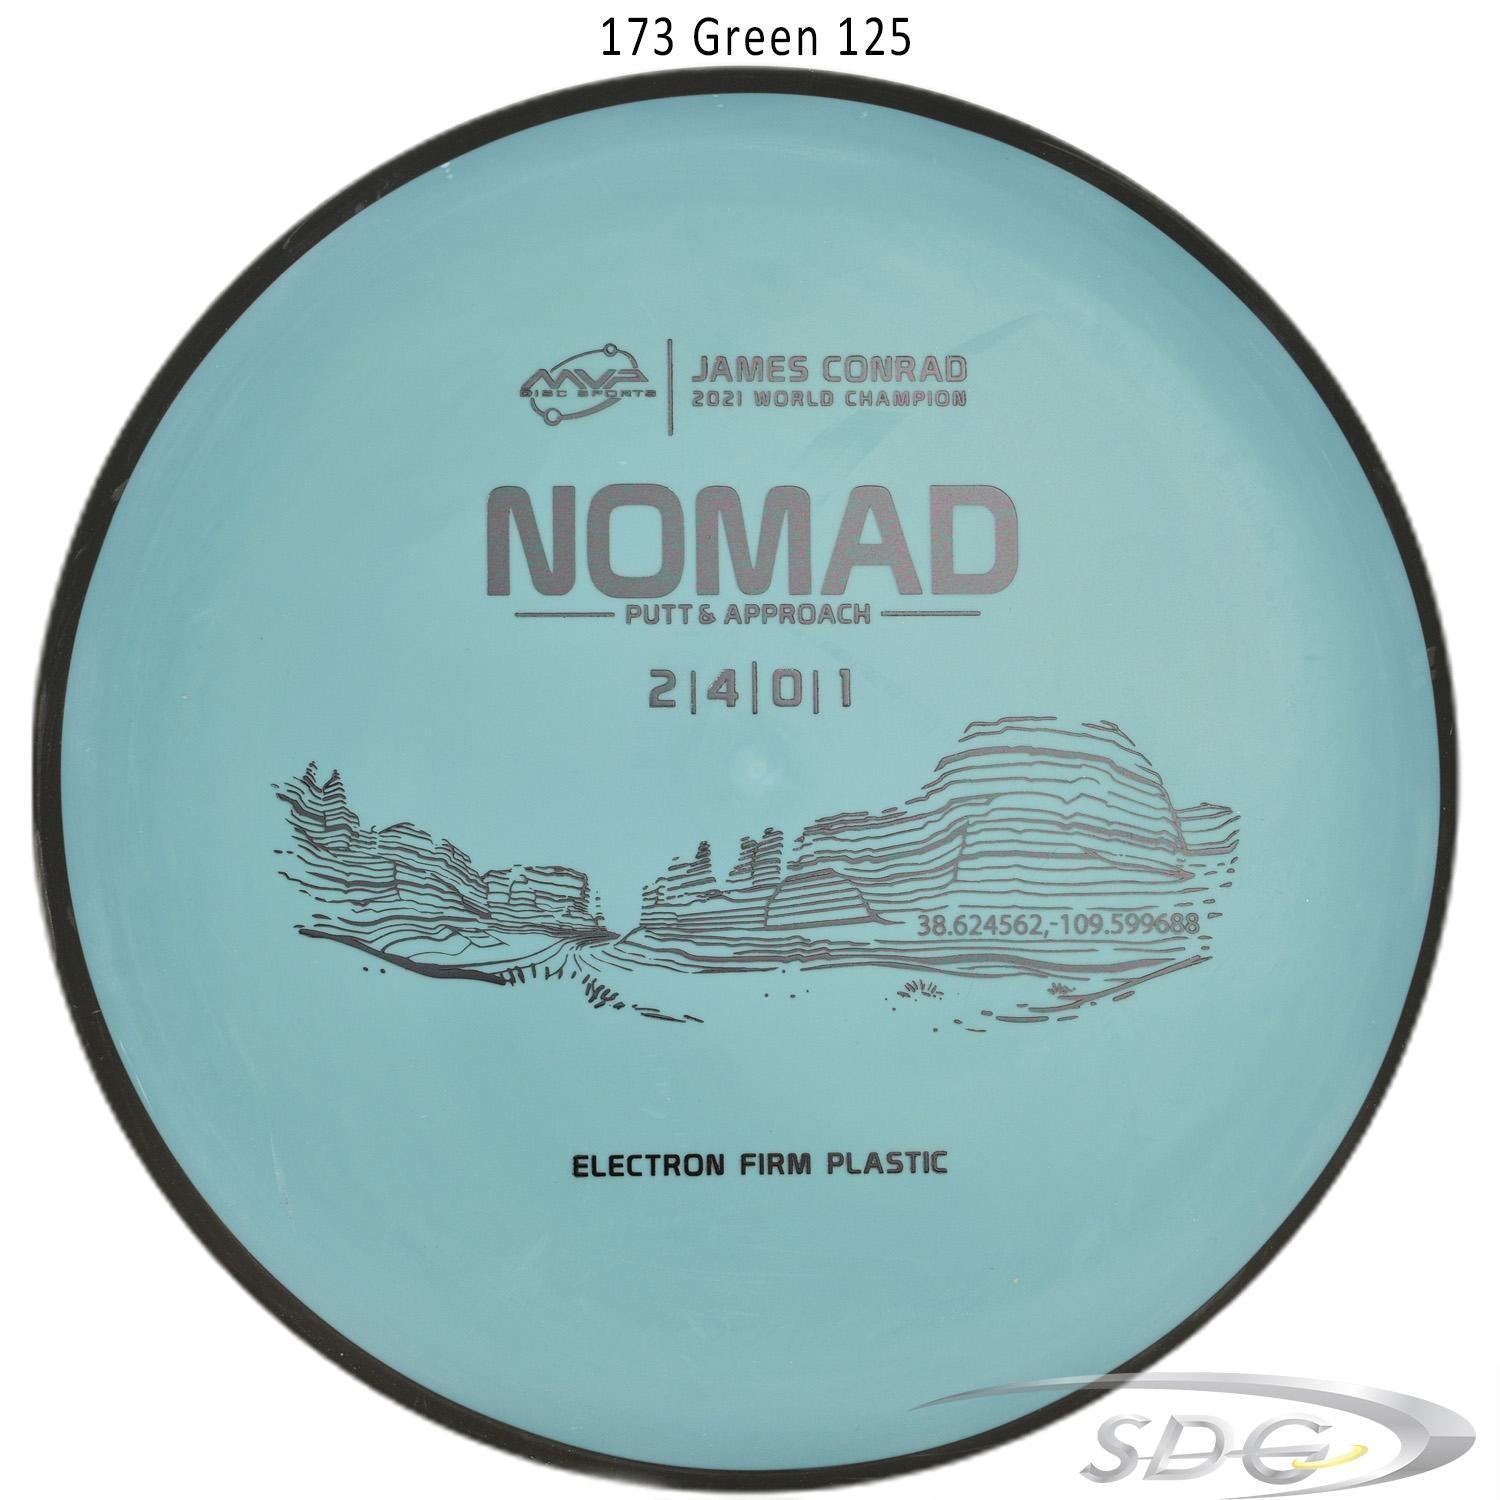 mvp-electron-nomad-firm-james-conrad-edition-disc-golf-putter 173 Green 125 